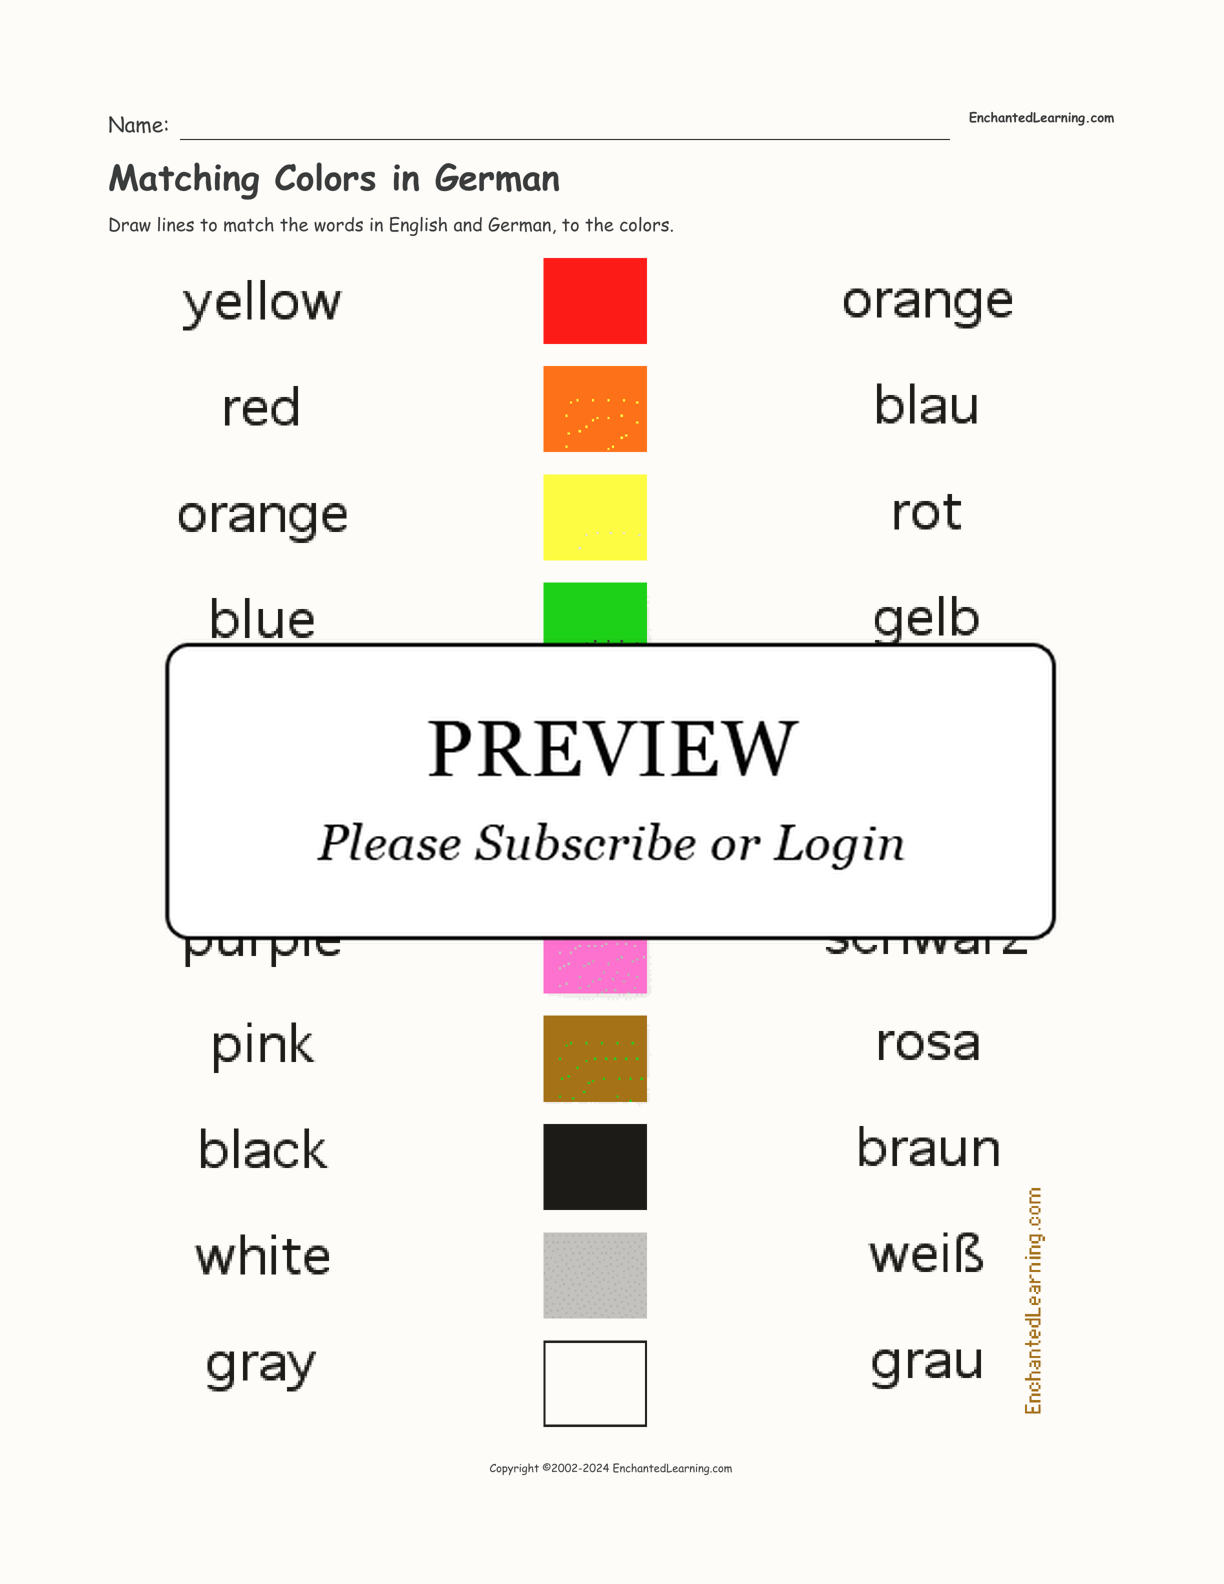 Matching Colors in German interactive worksheet page 1